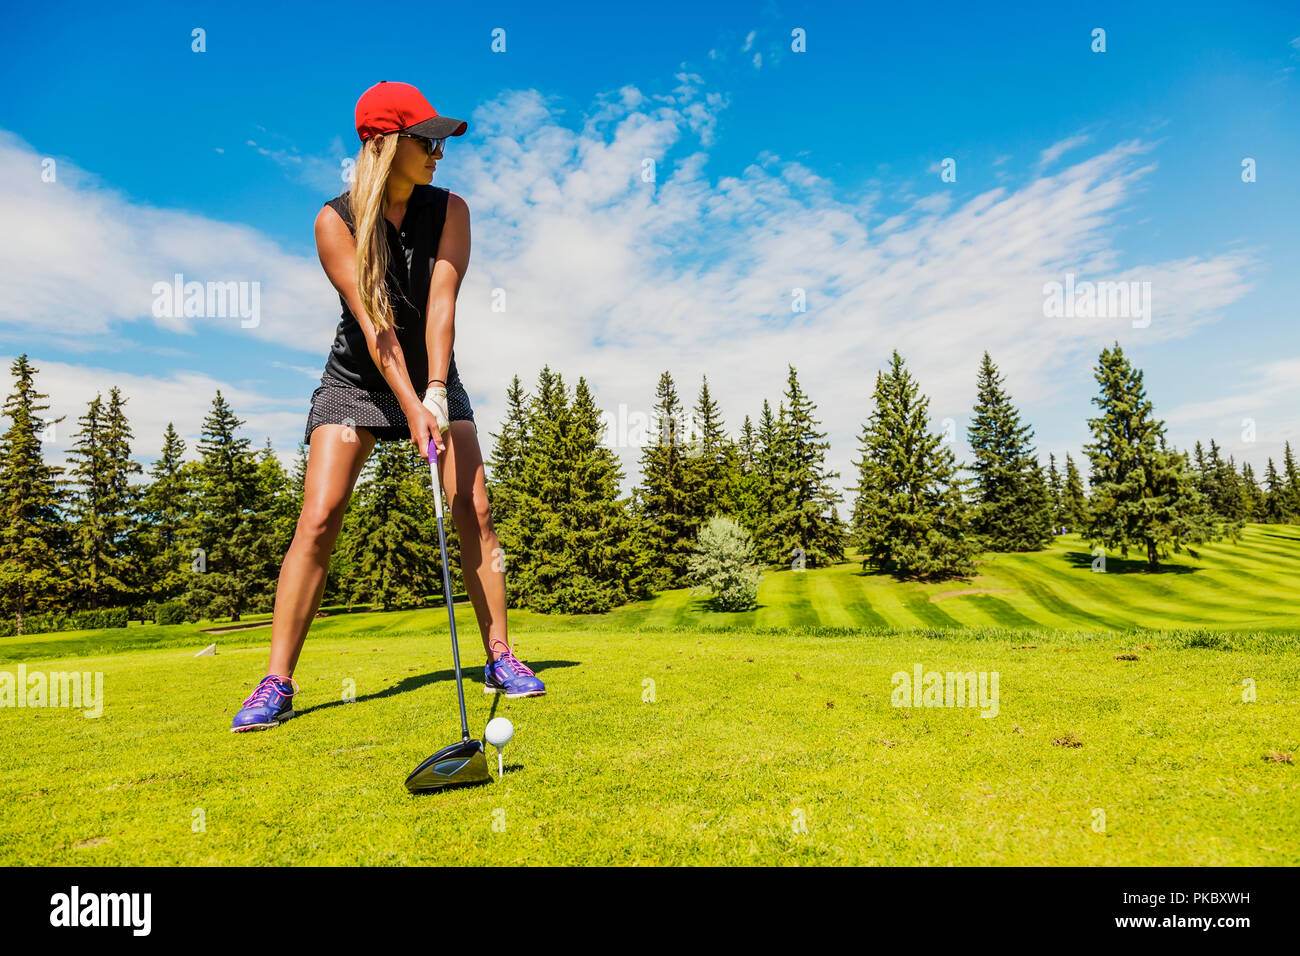 A female golfer lines up her driver to the golf ball on a tee; Edmonton, Alberta, Canada Stock Photo